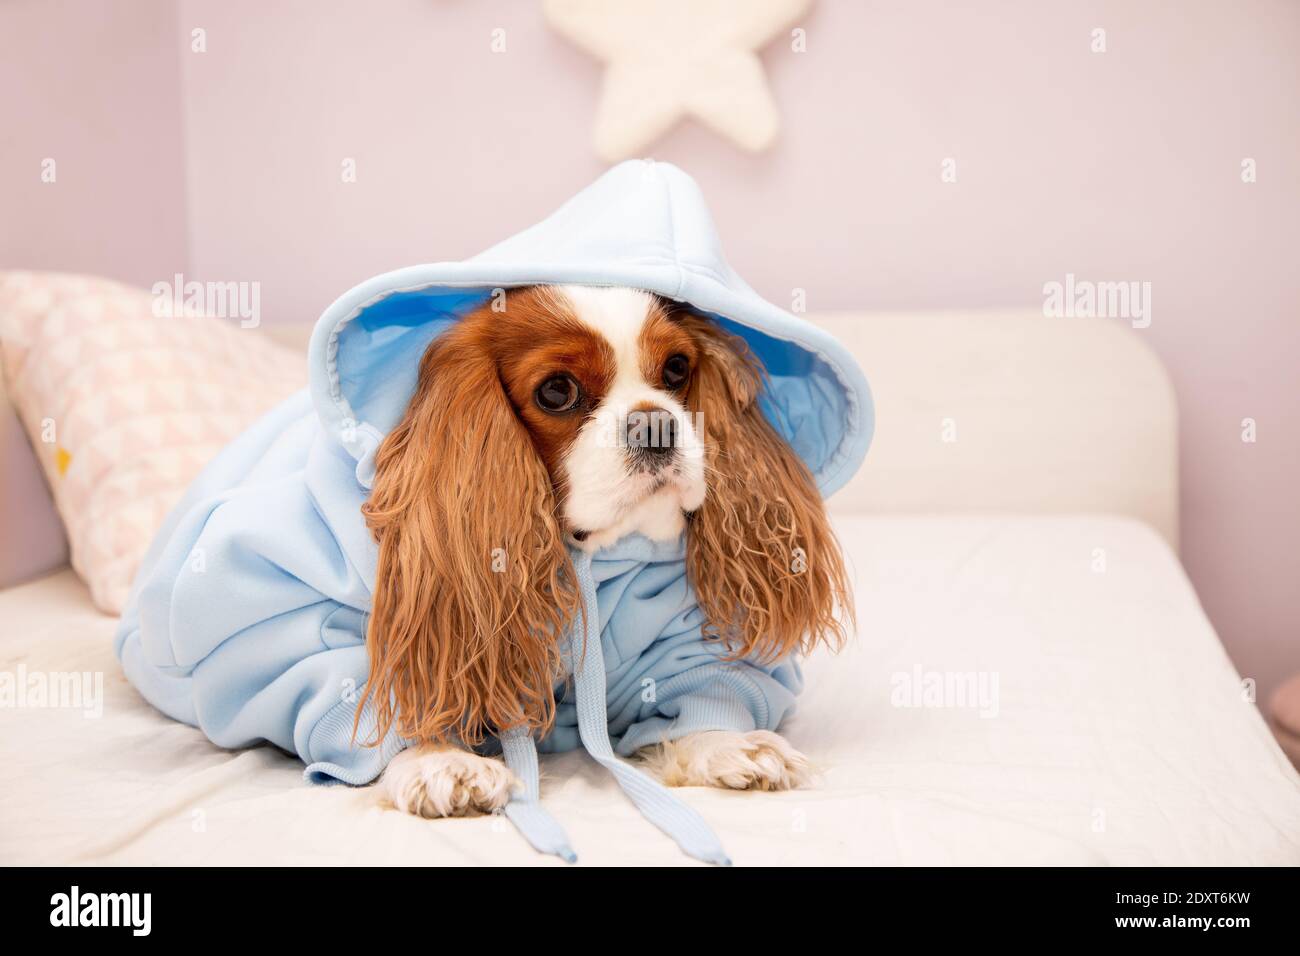 Pet dog Cavalier King Charles Spaniel in blue hoodie clothes on the bed in the bedroom. Cute mammal clothing concept. Close-up photo Stock Photo